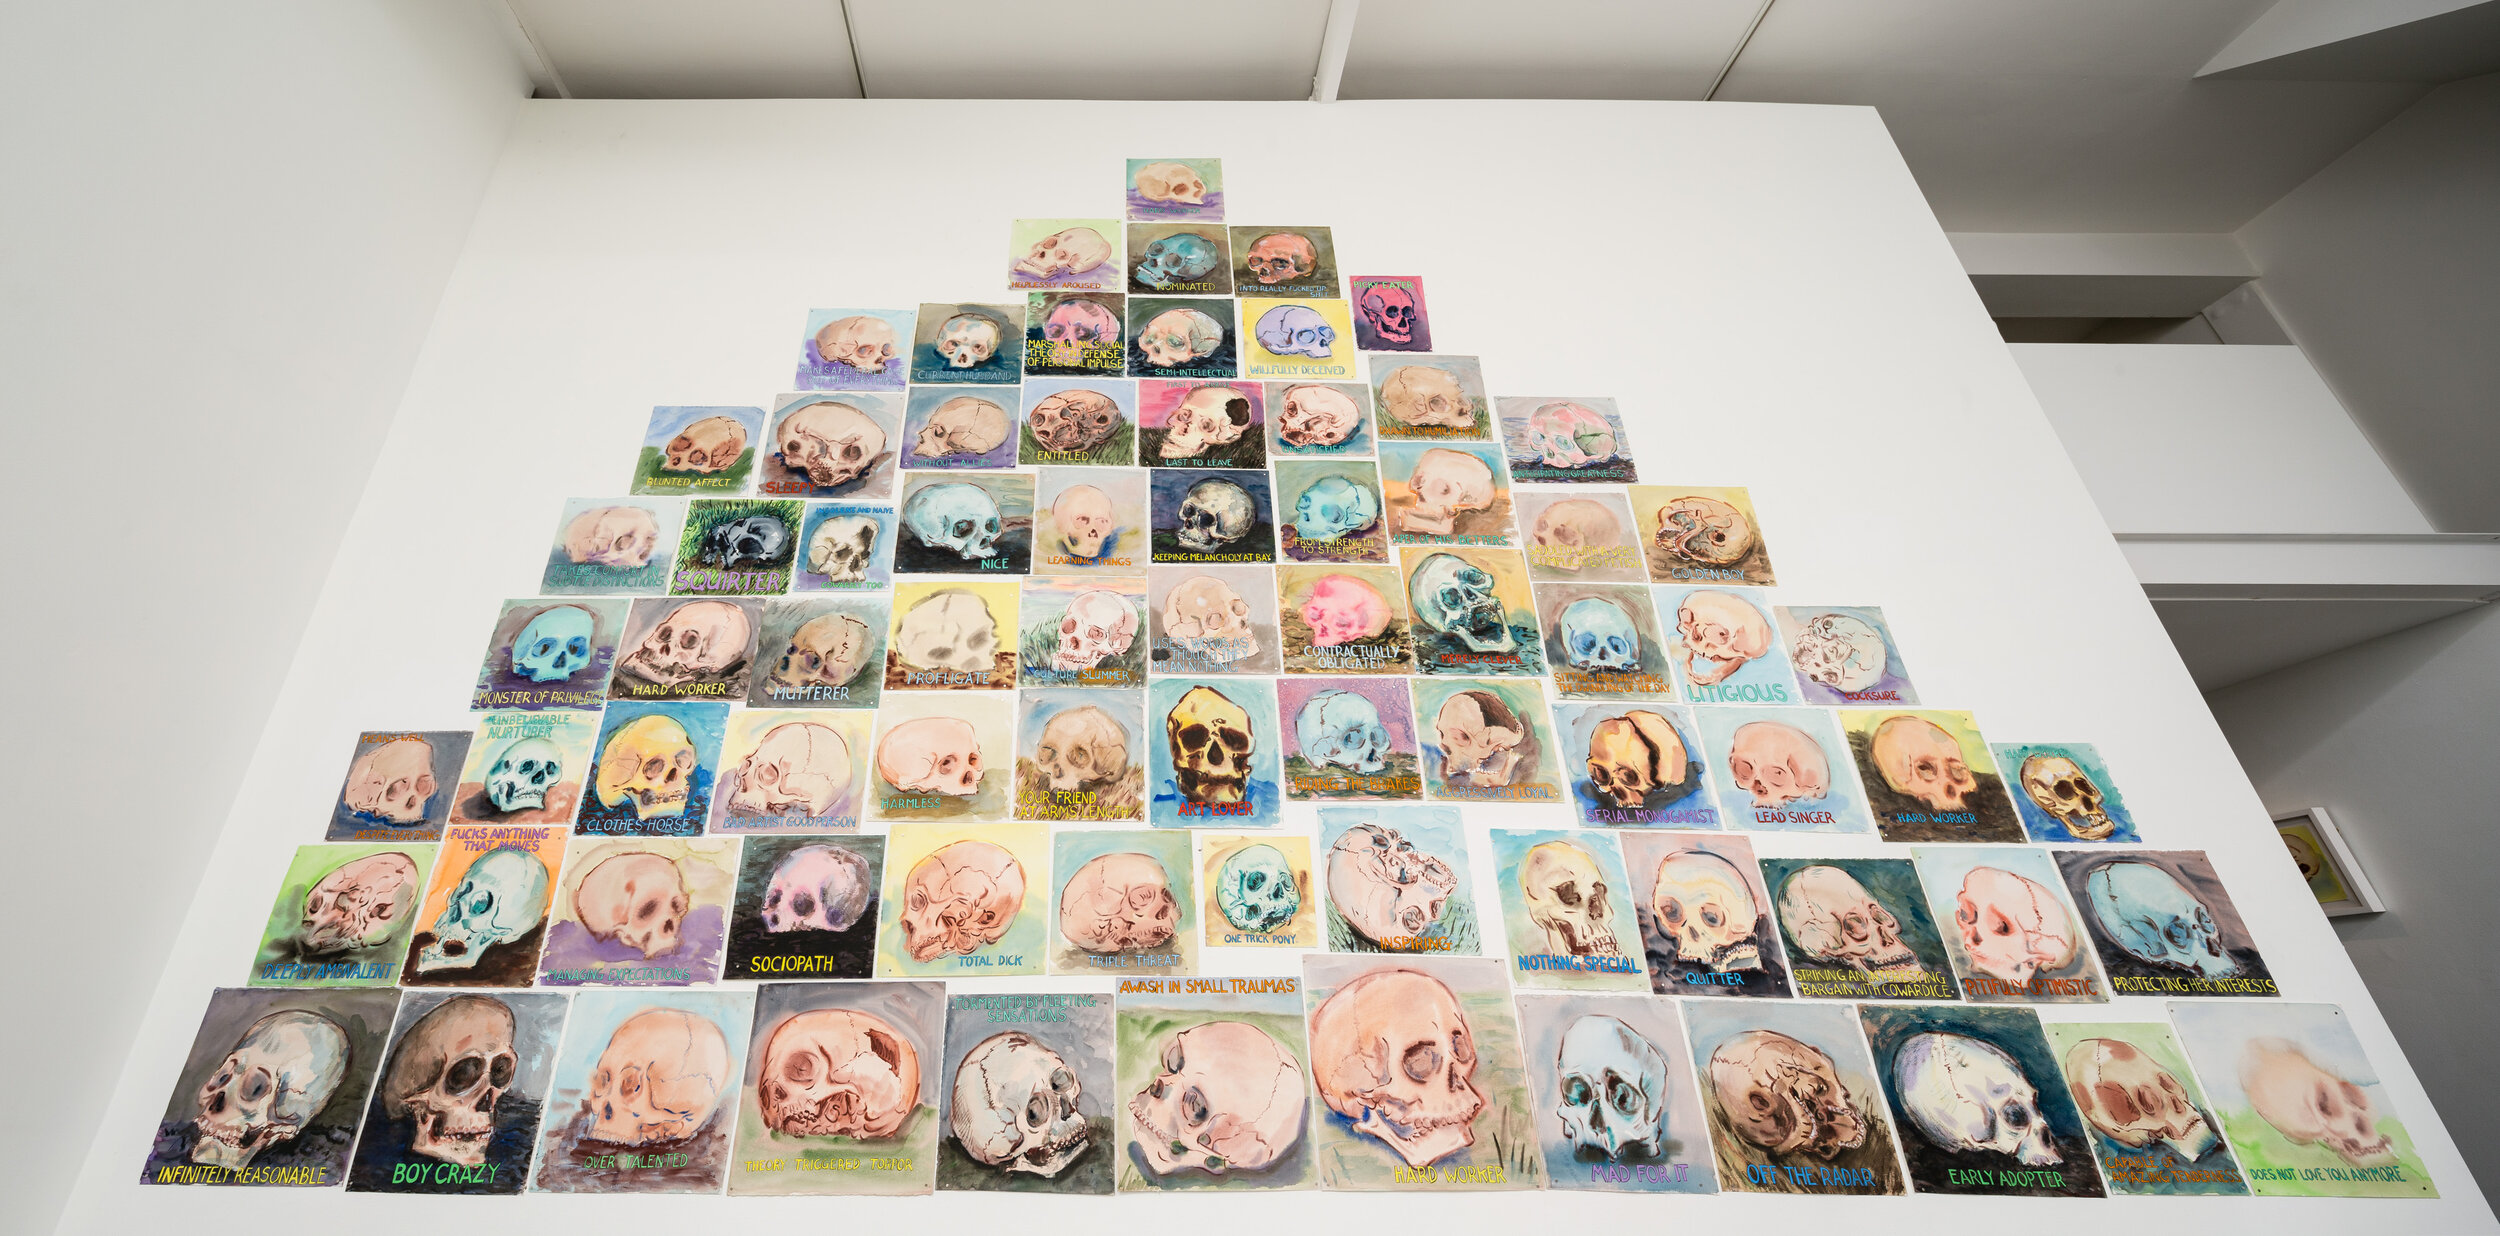  Guy Richards Smit,  A Mountain of Skulls and Not One I Recognize , Installation at CJG, Feb 2016 